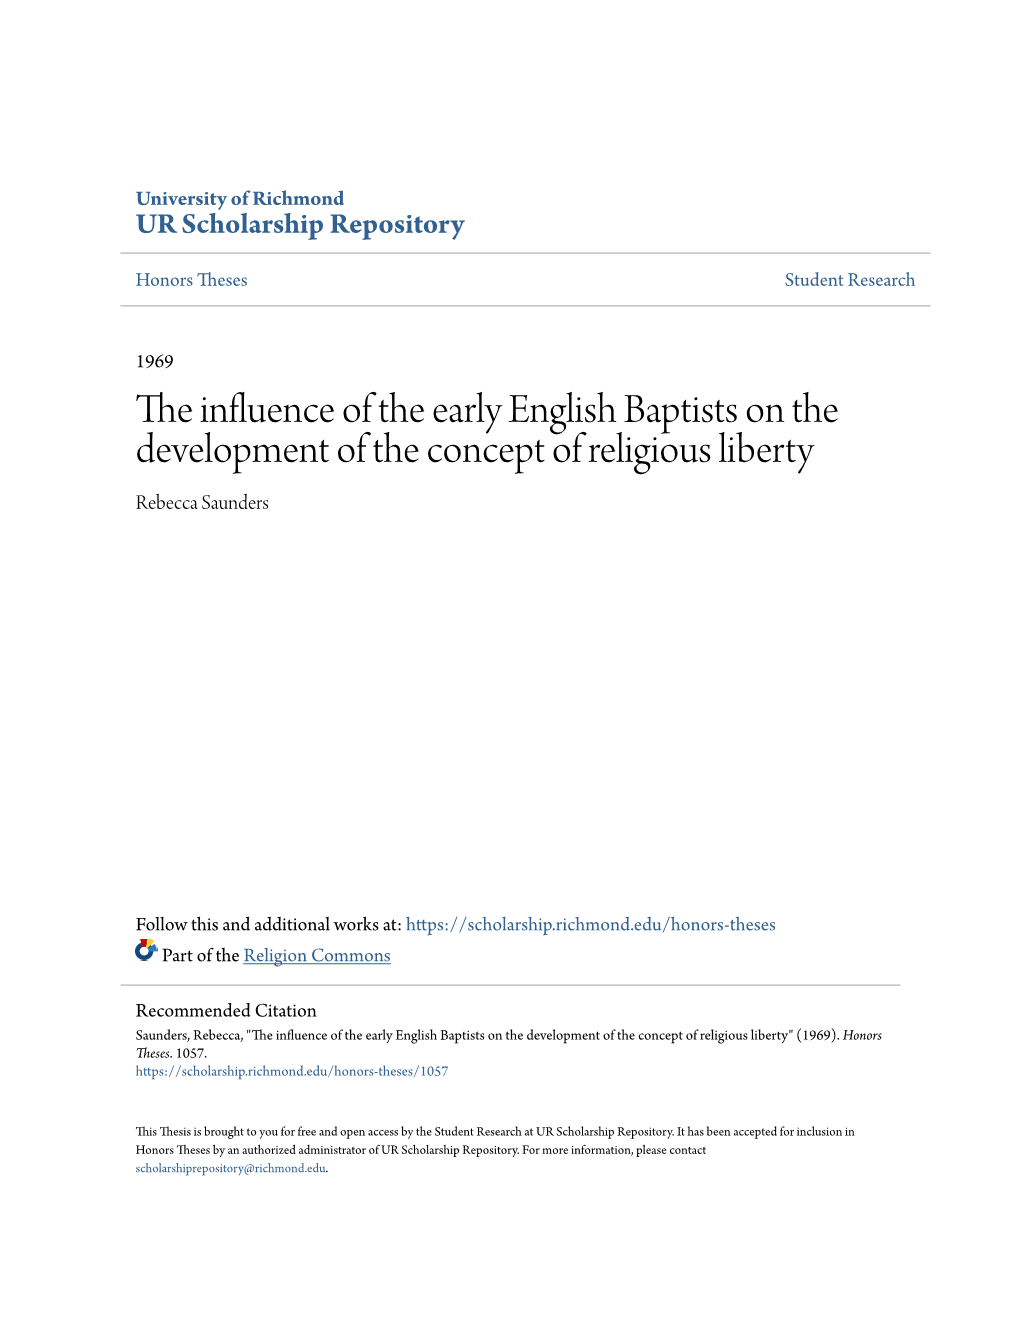 The Influence of the Early English Baptists on the Development of the Concept of Religious Liberty Rebecca Saunders